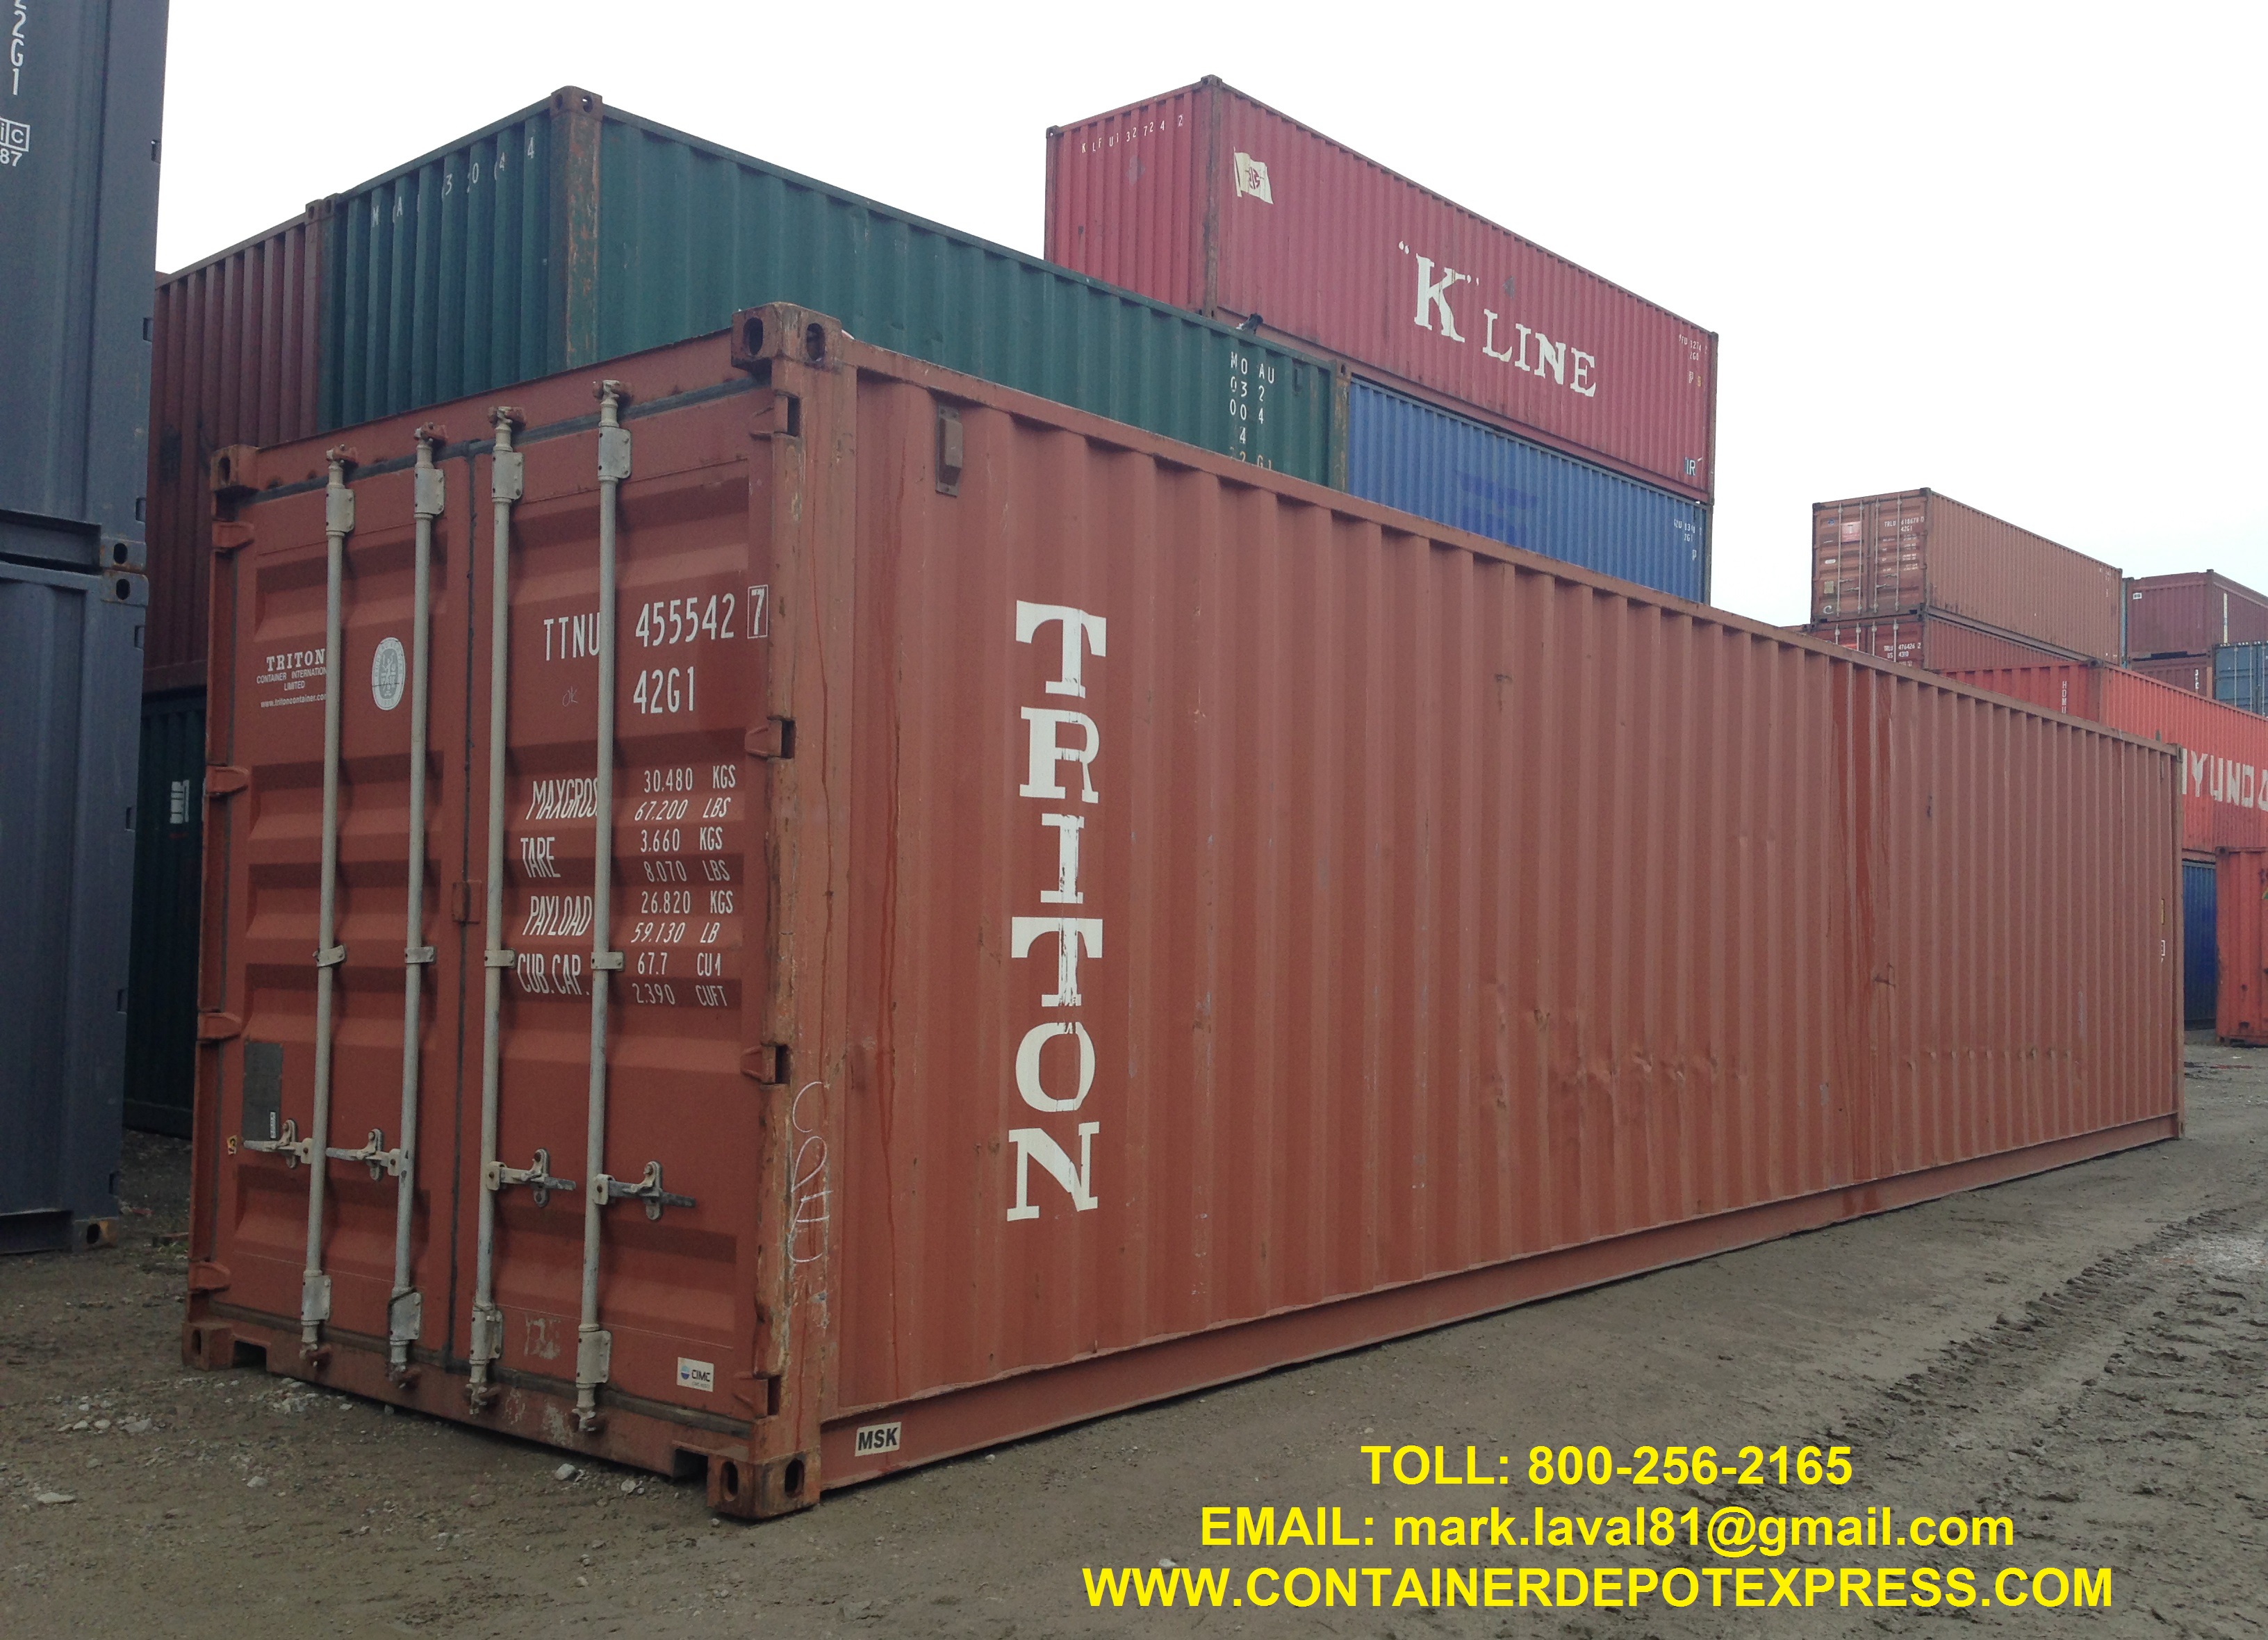 New & Used Steel Storage Containers - Sea Containers for Rent or SALE